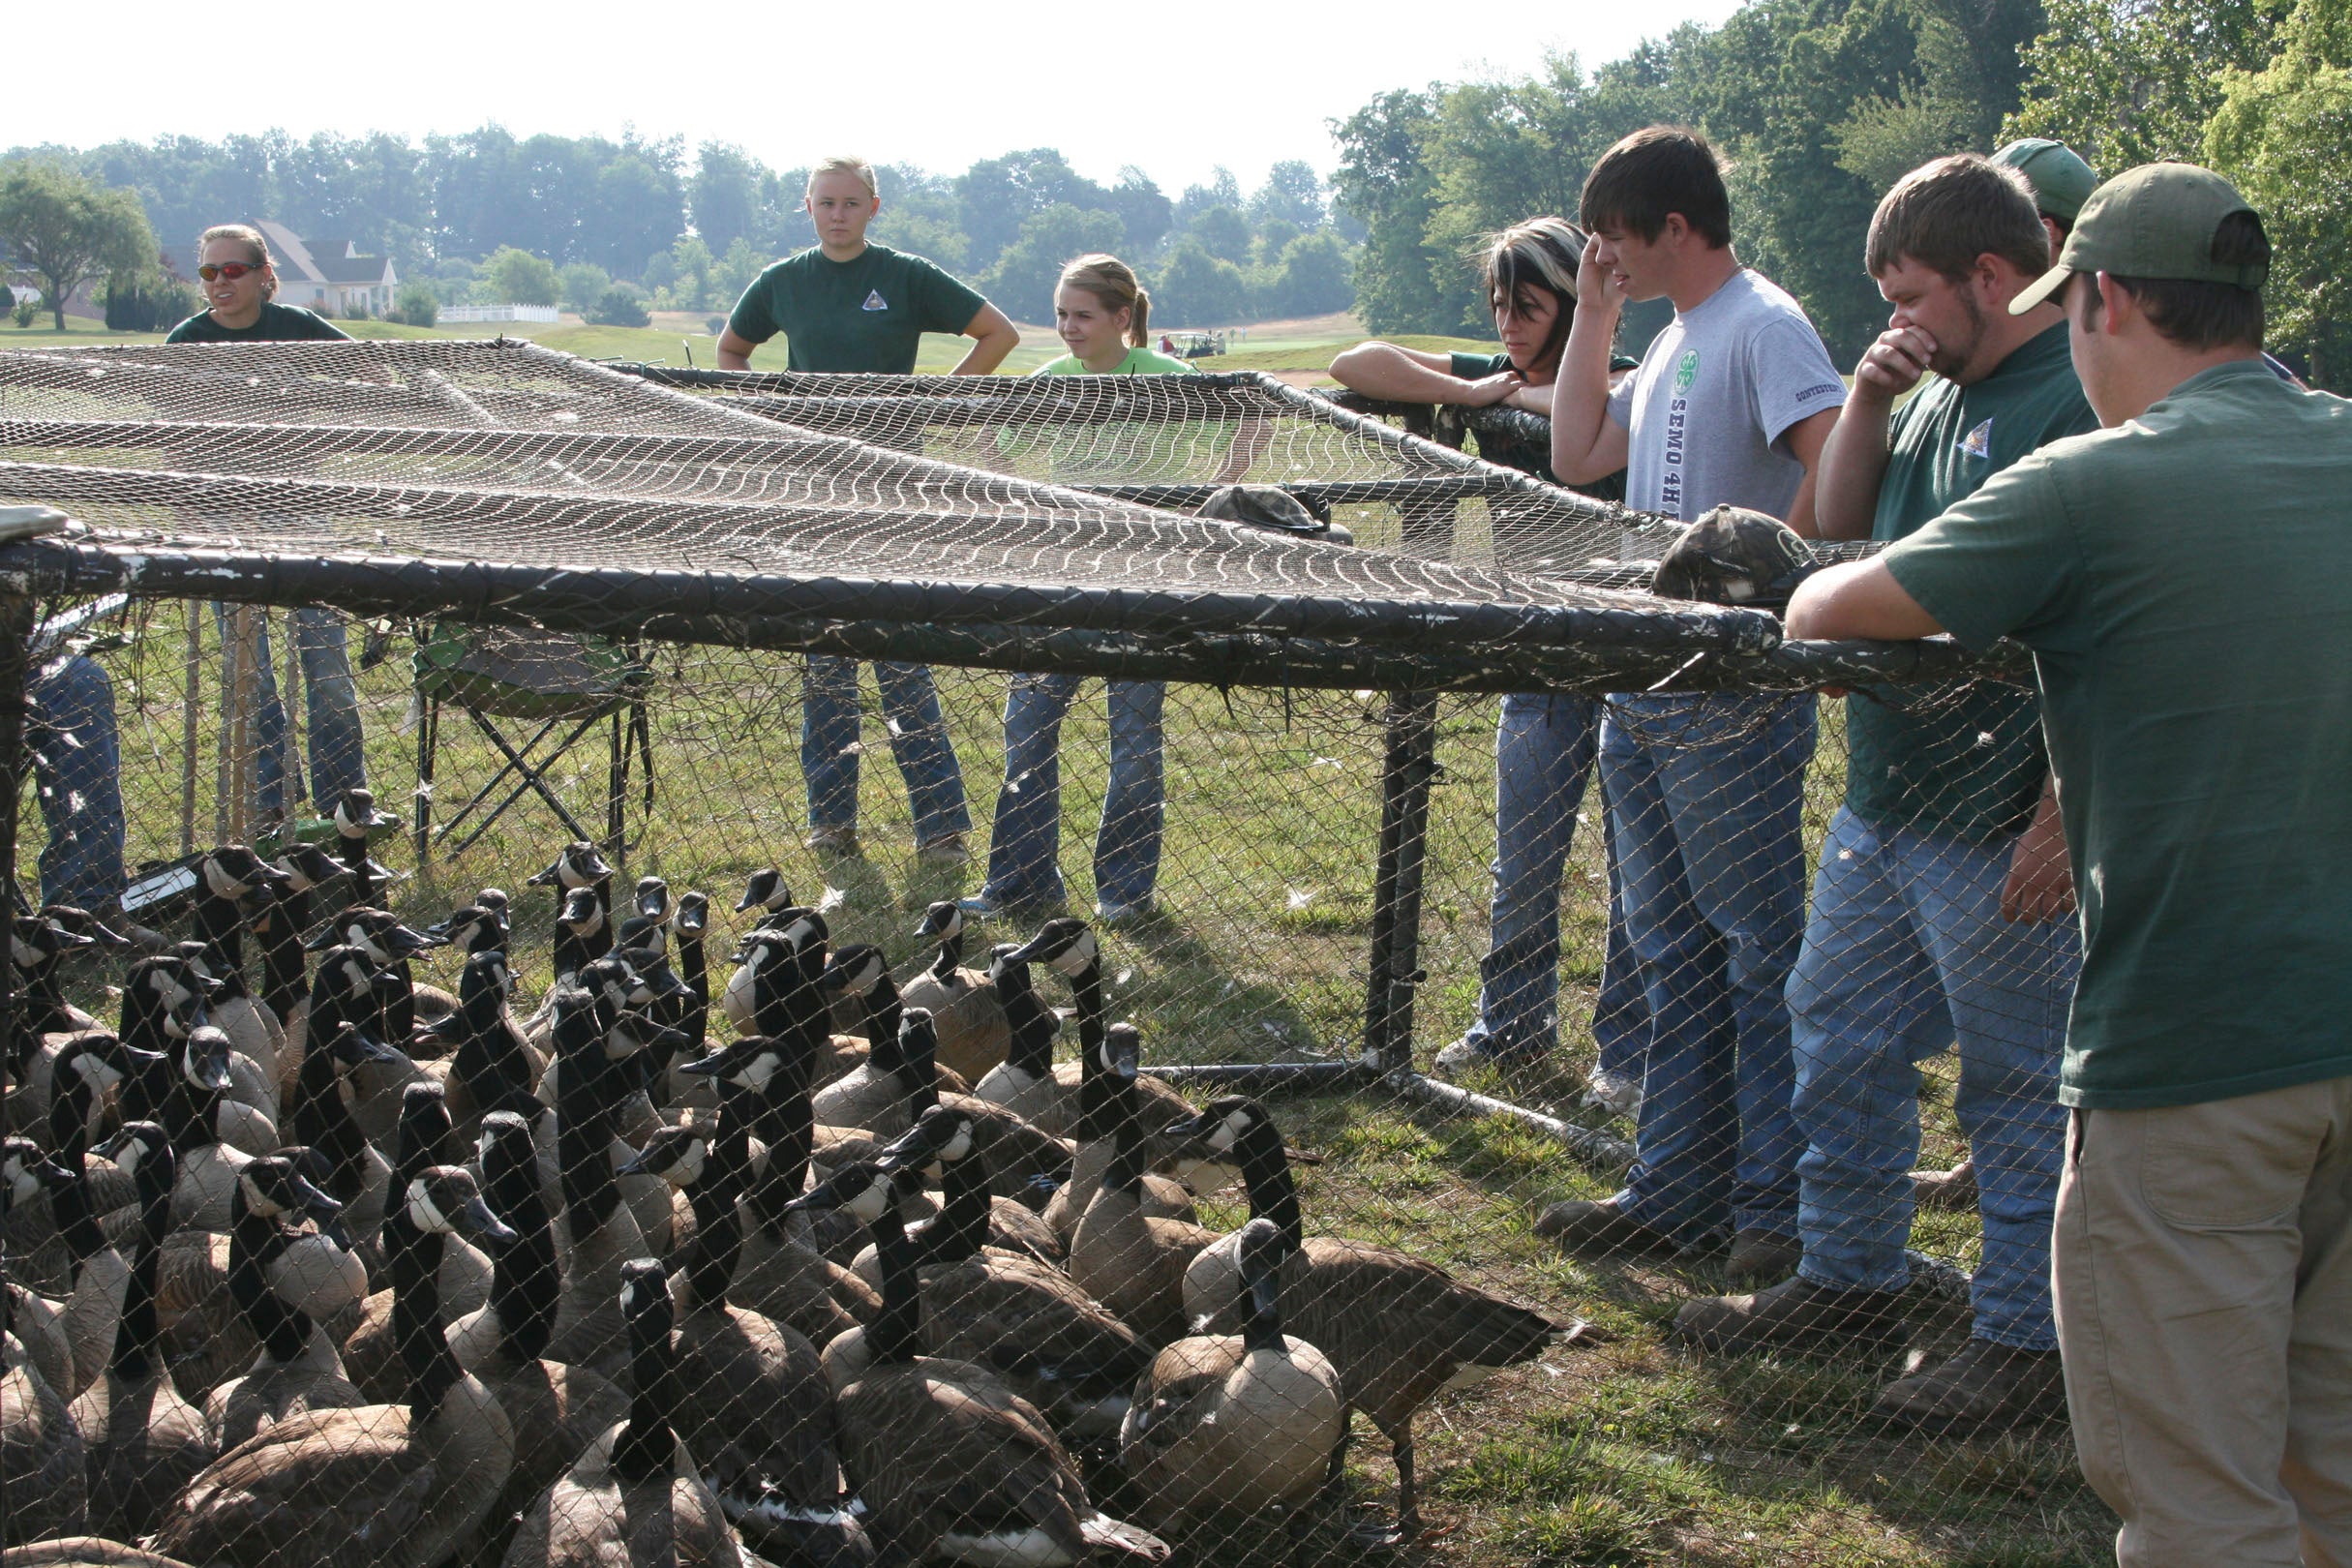 Goose Banding in Cape Girardeau with Geese in Pen